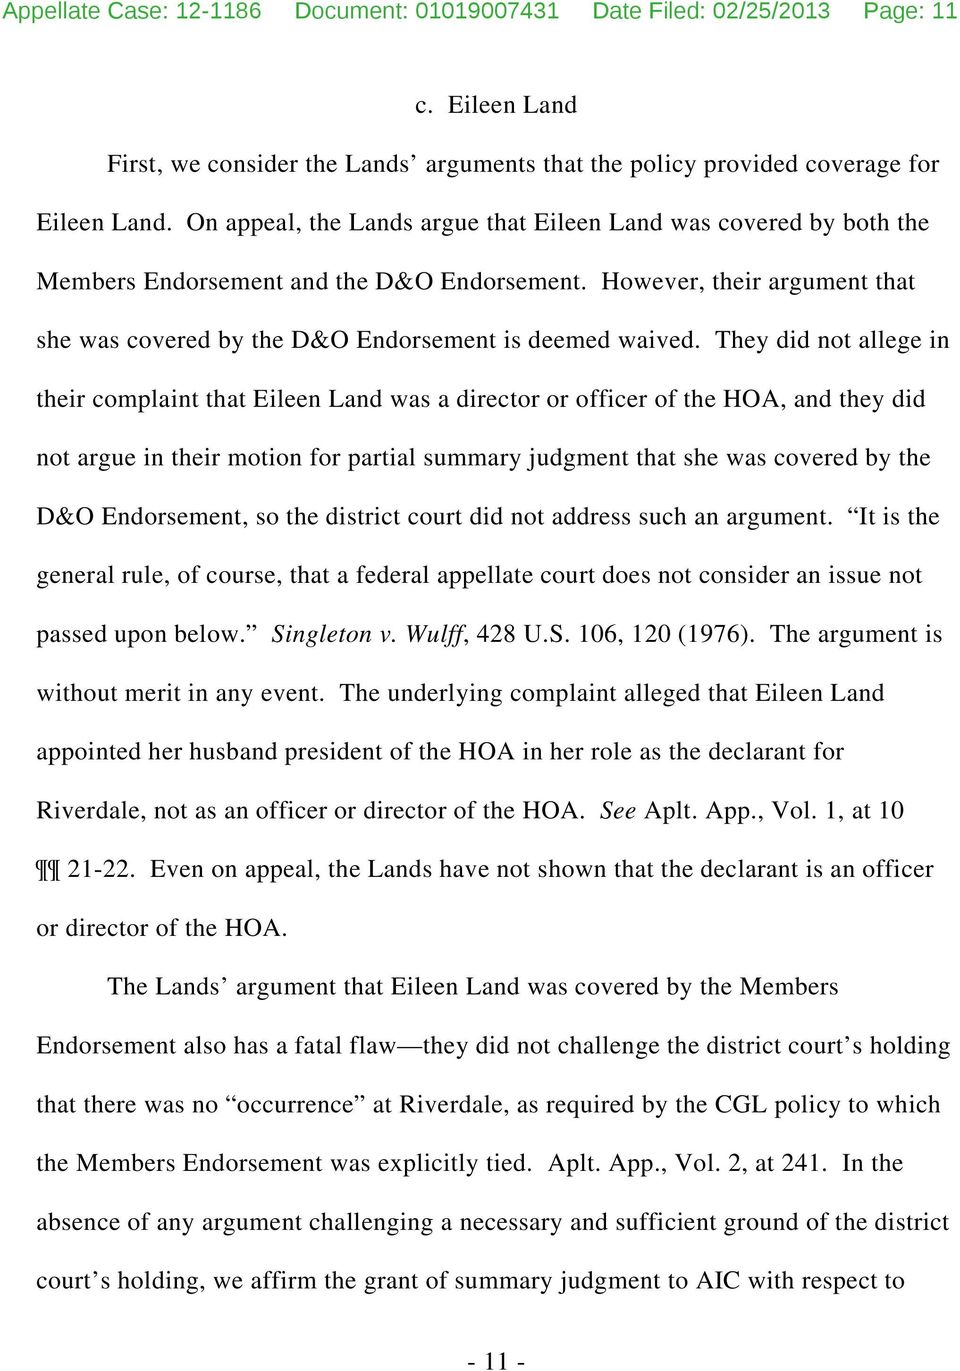 They did not allege in their complaint that Eileen Land was a director or officer of the HOA, and they did not argue in their motion for partial summary judgment that she was covered by the D&O